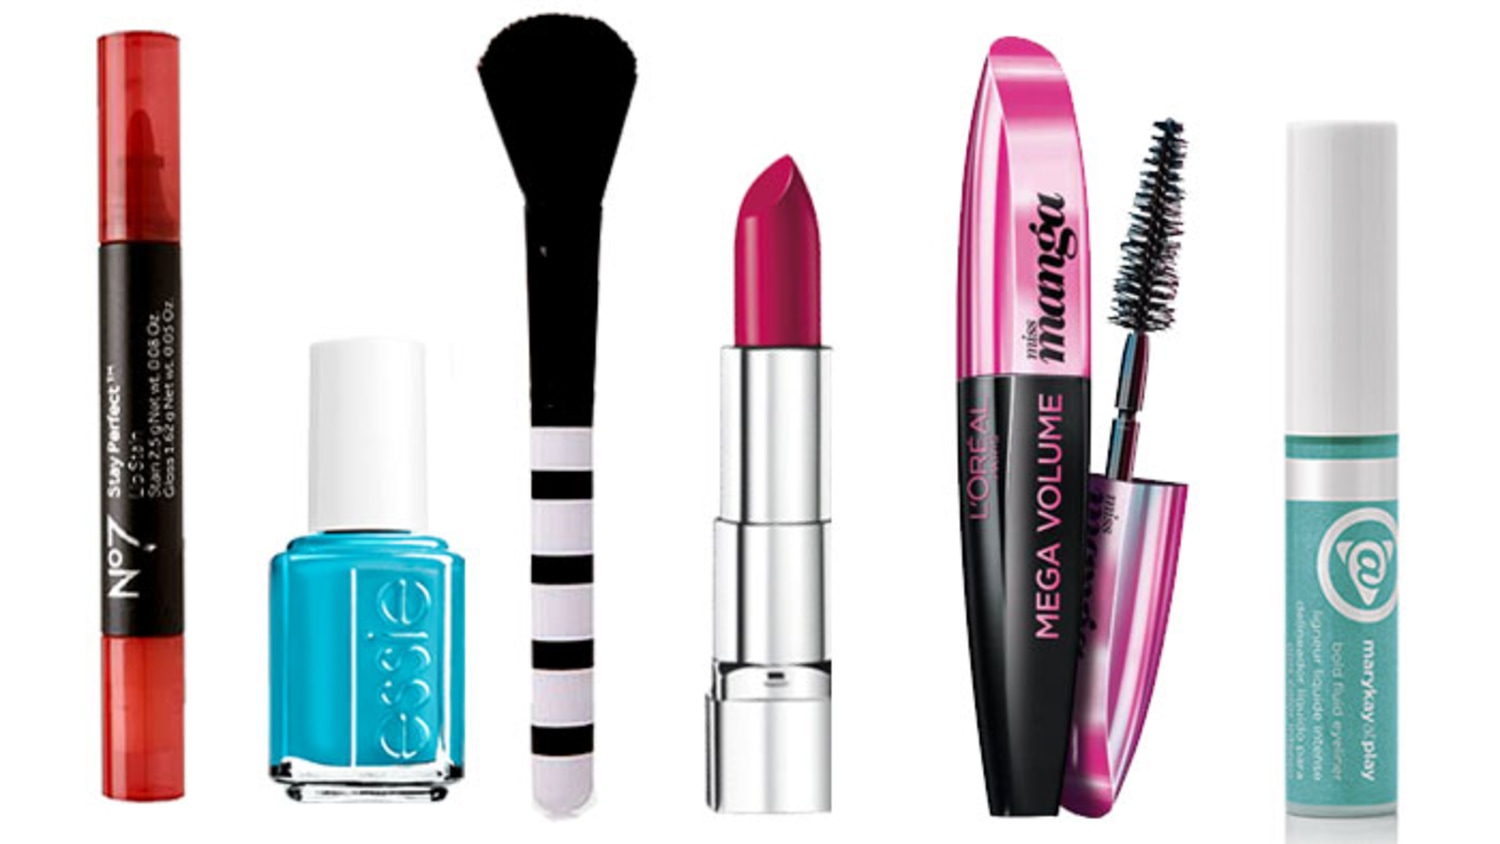 Cheap beauty products: Best mascara, lipstick, eyeliner and more